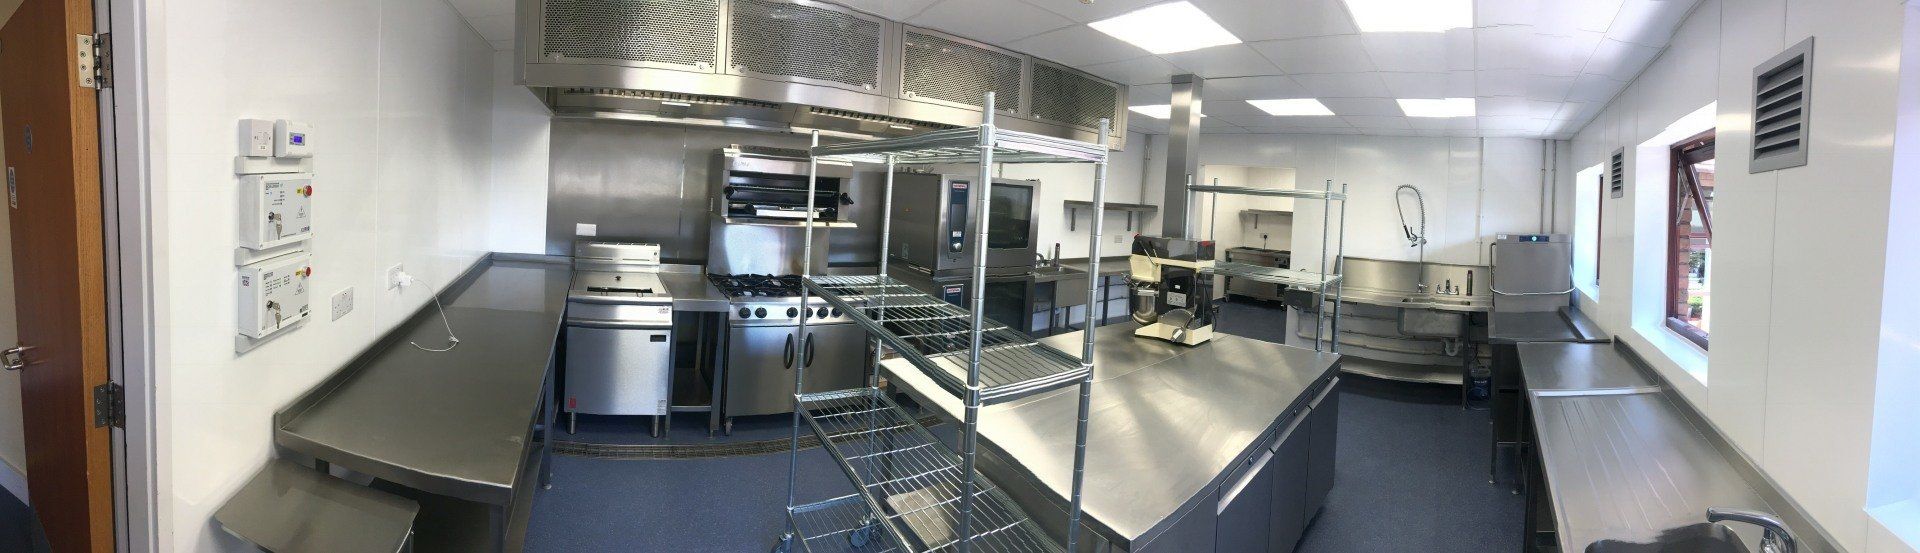 the kitchen at Lindsey Lodge Hospice in Scunthorpe